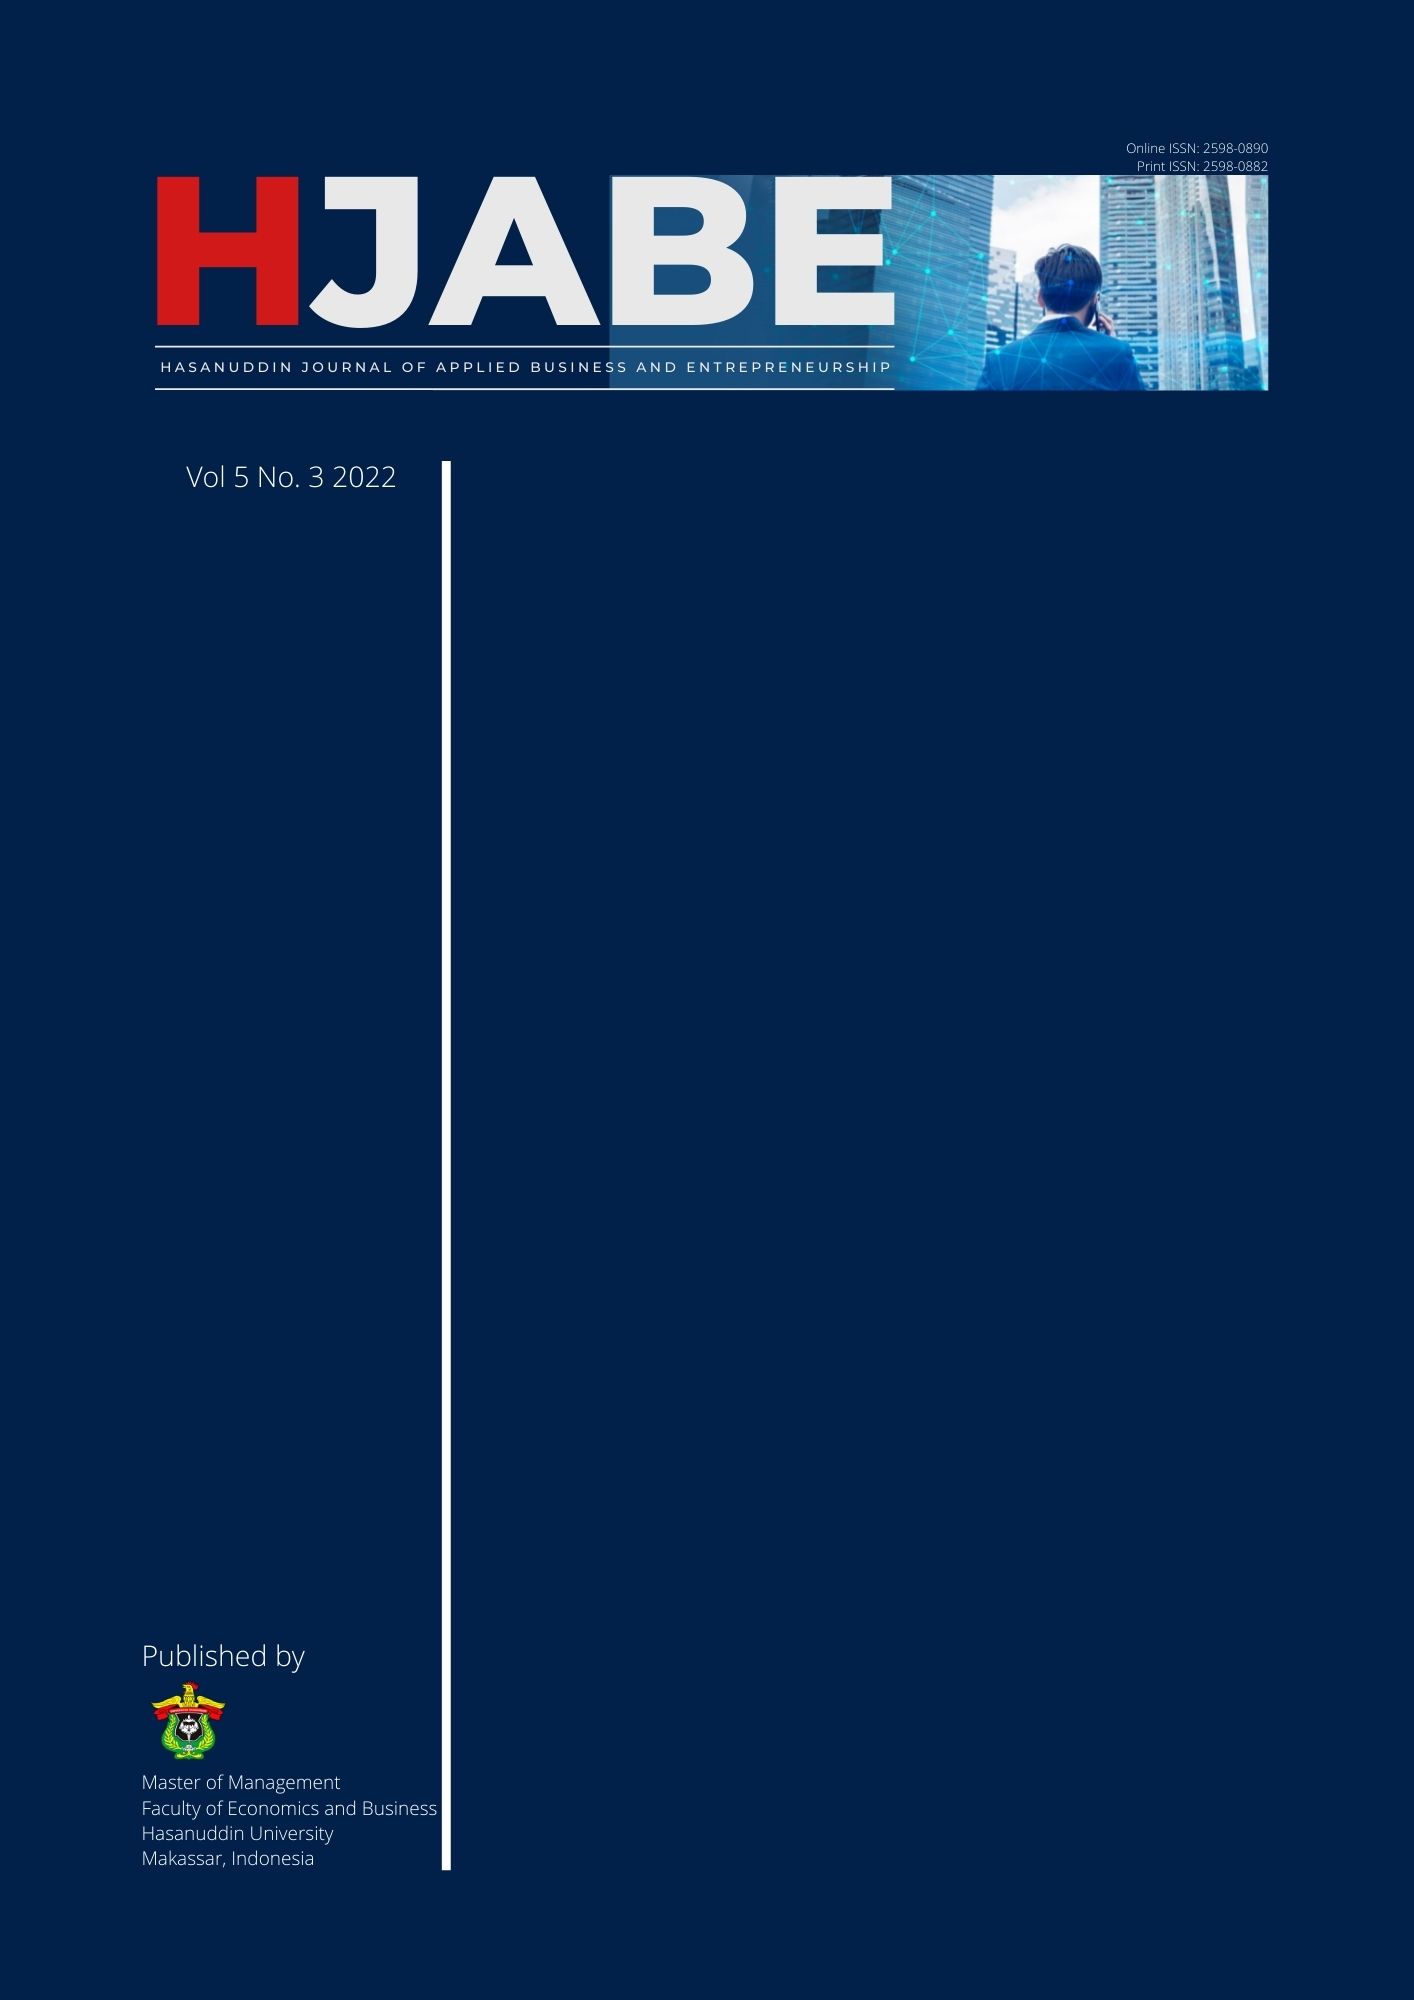 					View Vol. 5 No. 3 (2022): Hasanuddin Journal of Applied Business and Entrepreneurship
				